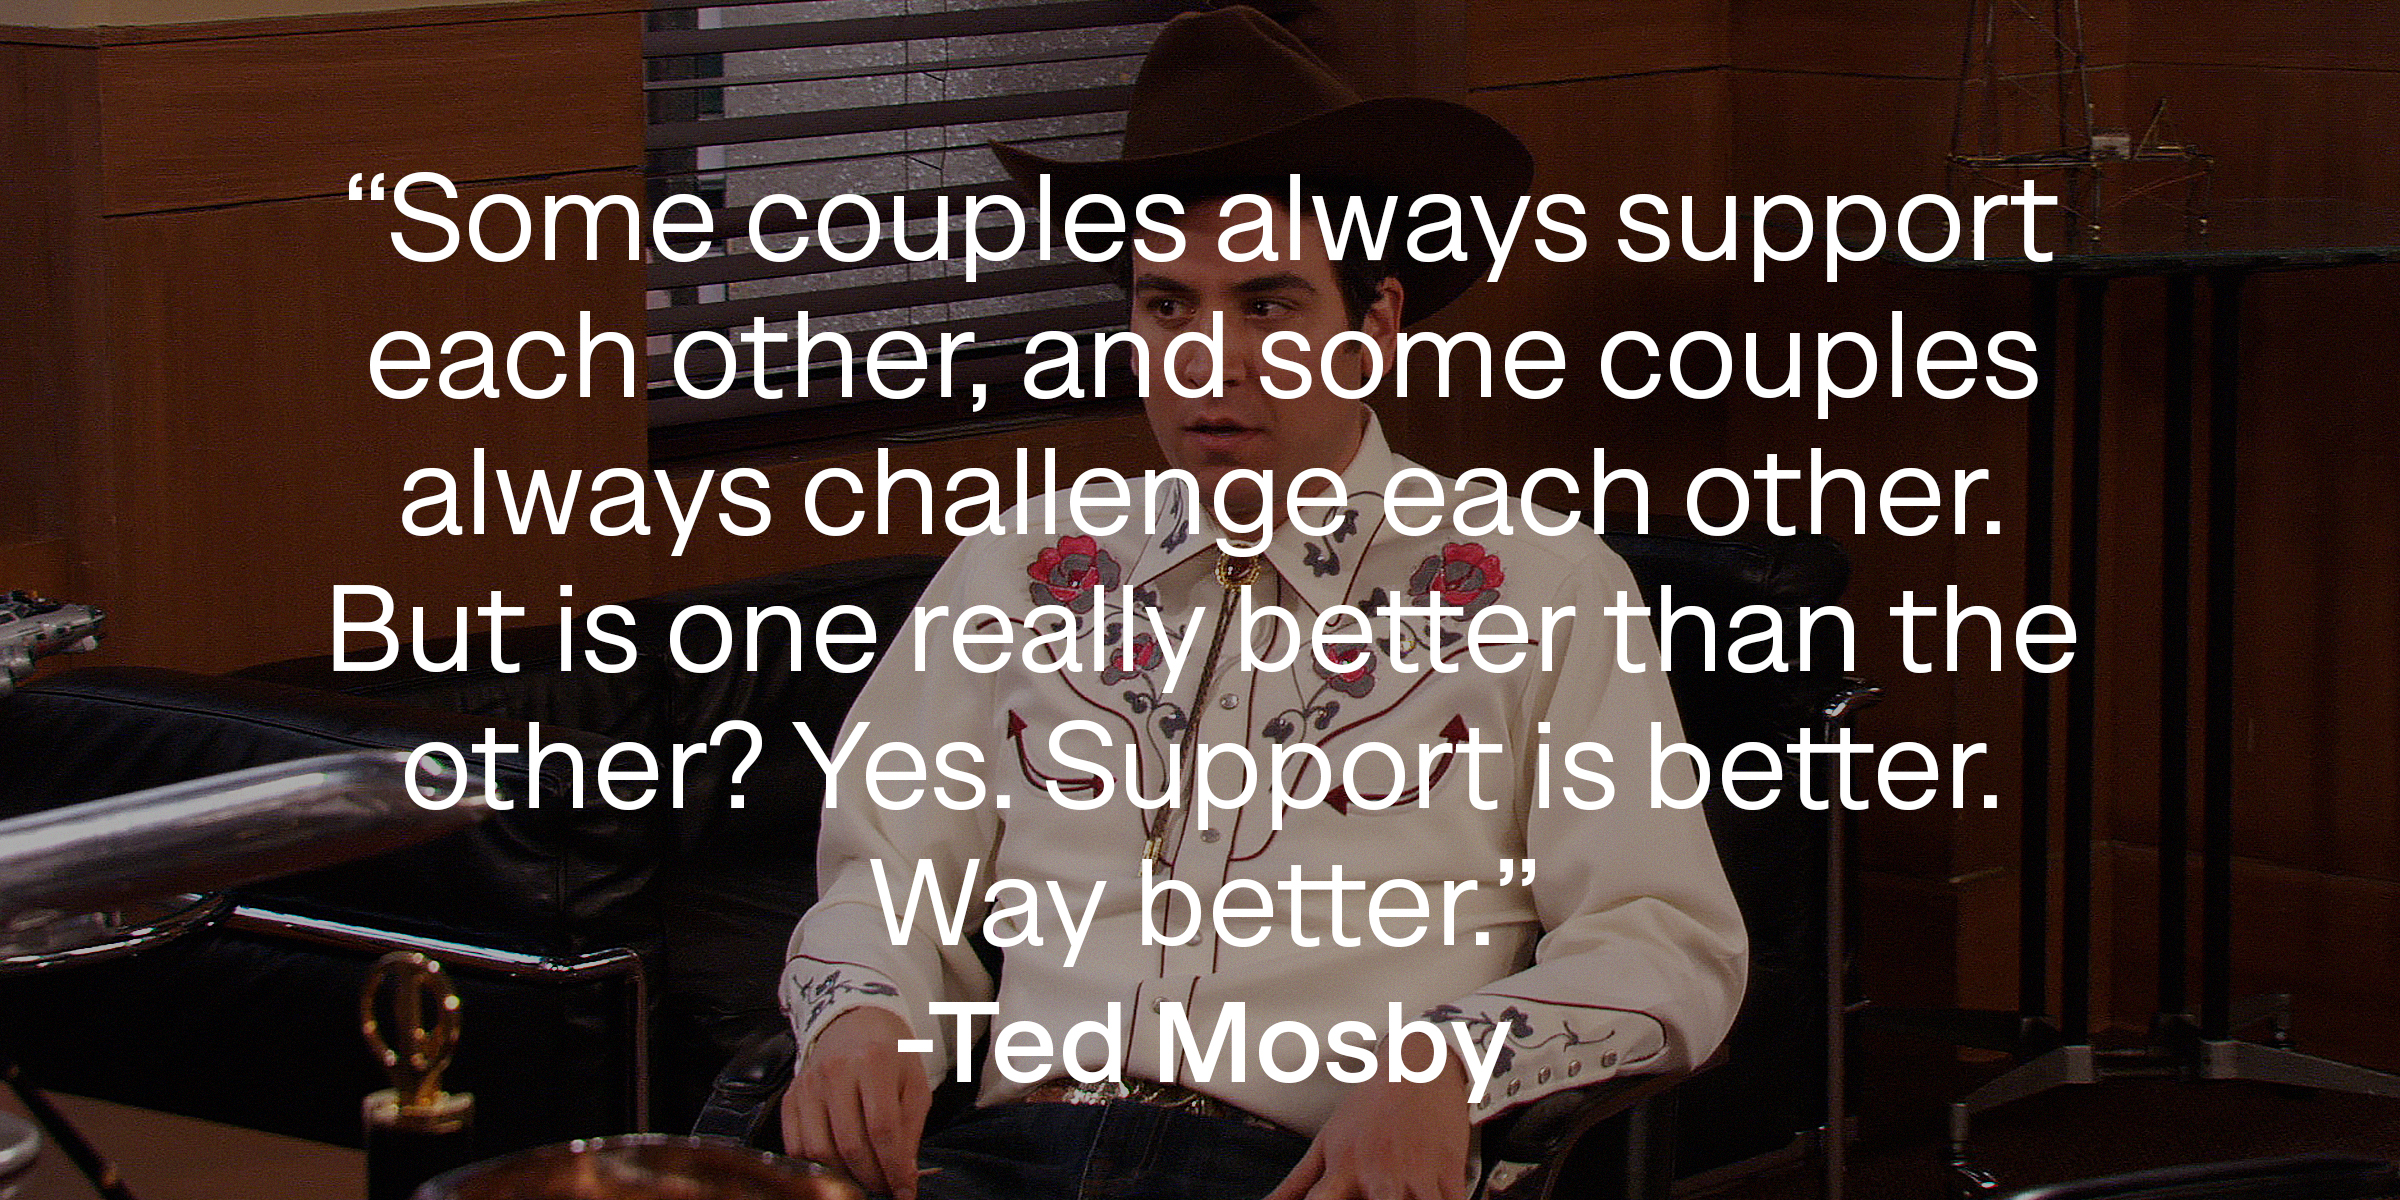 A photo of Ted Mosby with Ted Mosby's quote: “Some couples always support each other, and some couples always challenge each other. But is one really better than the other? Yes. Support is better. Way better.” | Source: facebook.com/OfficialHowIMetYourMot